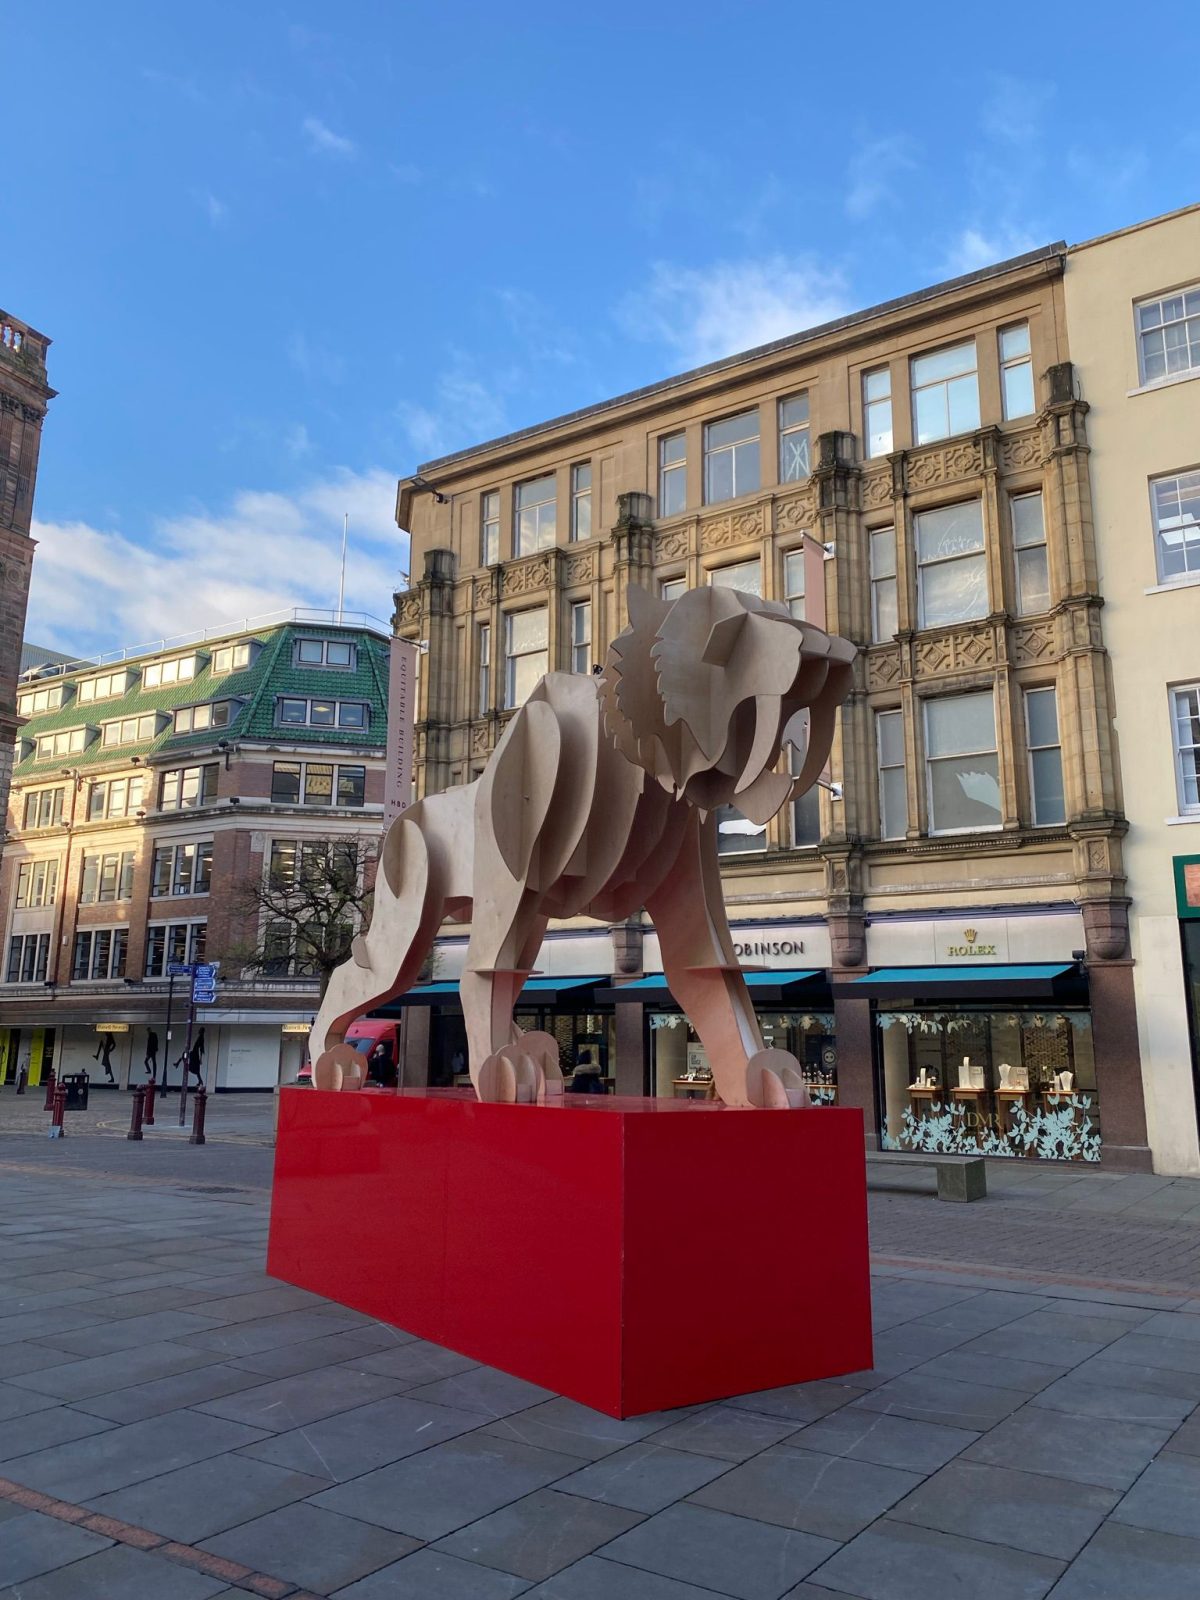 A giant tiger sculpture has appeared in Manchester city centre for Chinese New Year, The Manc